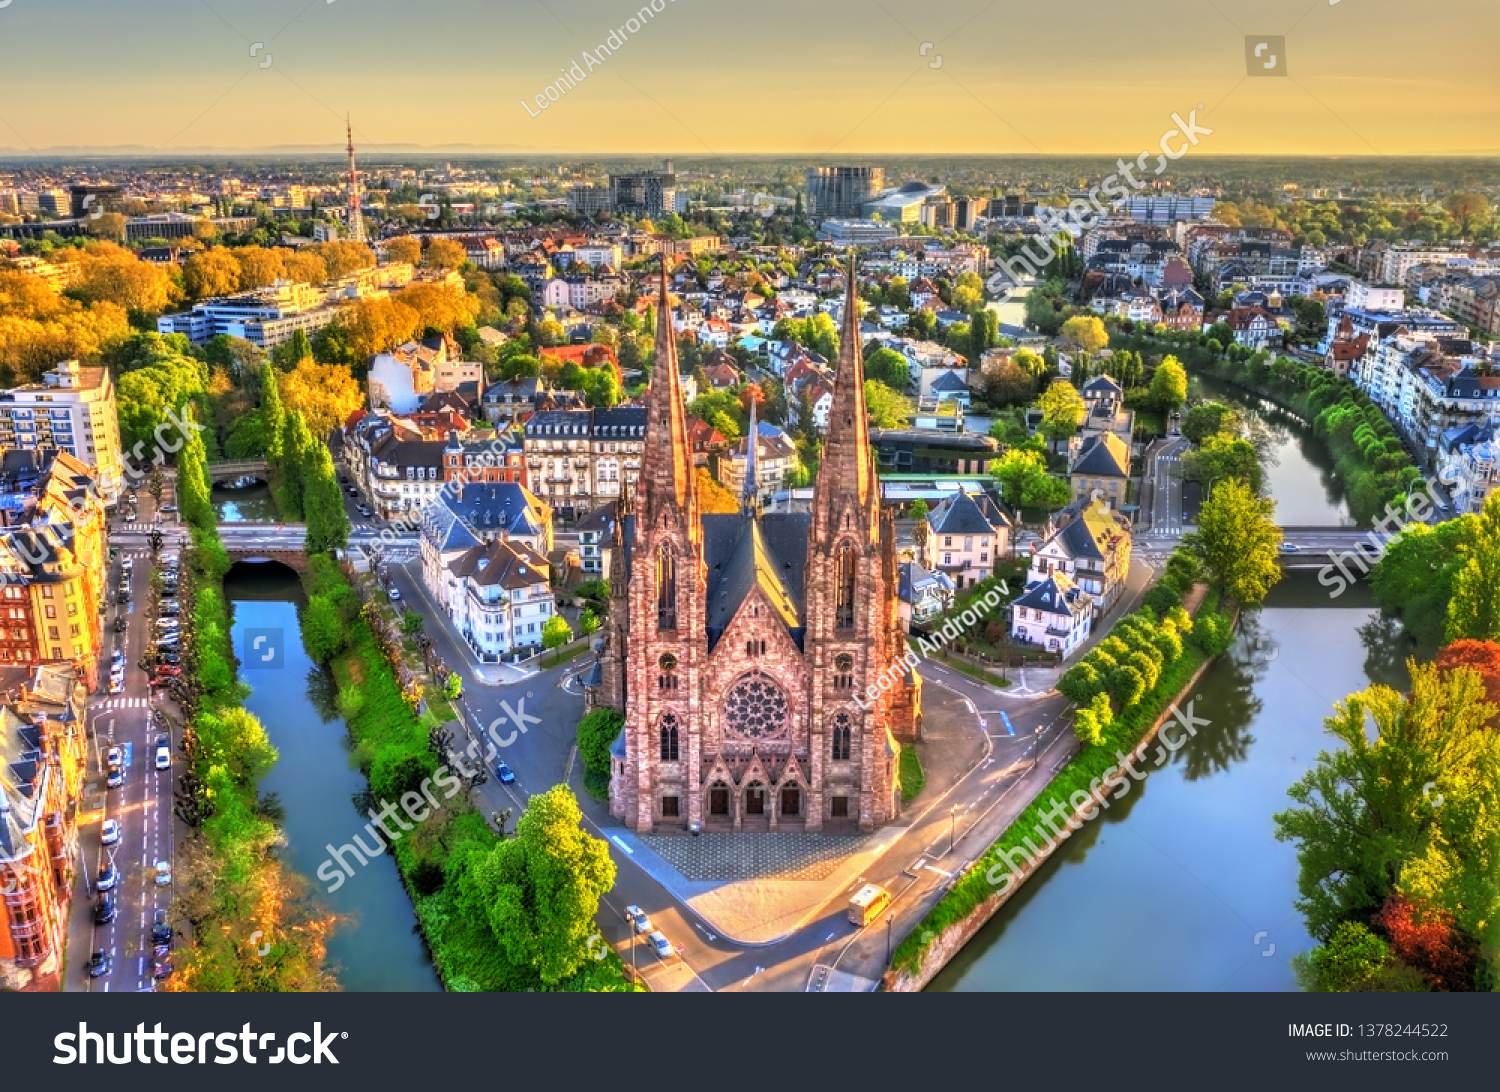 Aerial view of the Saint Paul Church in Strasbourg - Alsace, France #1378244522